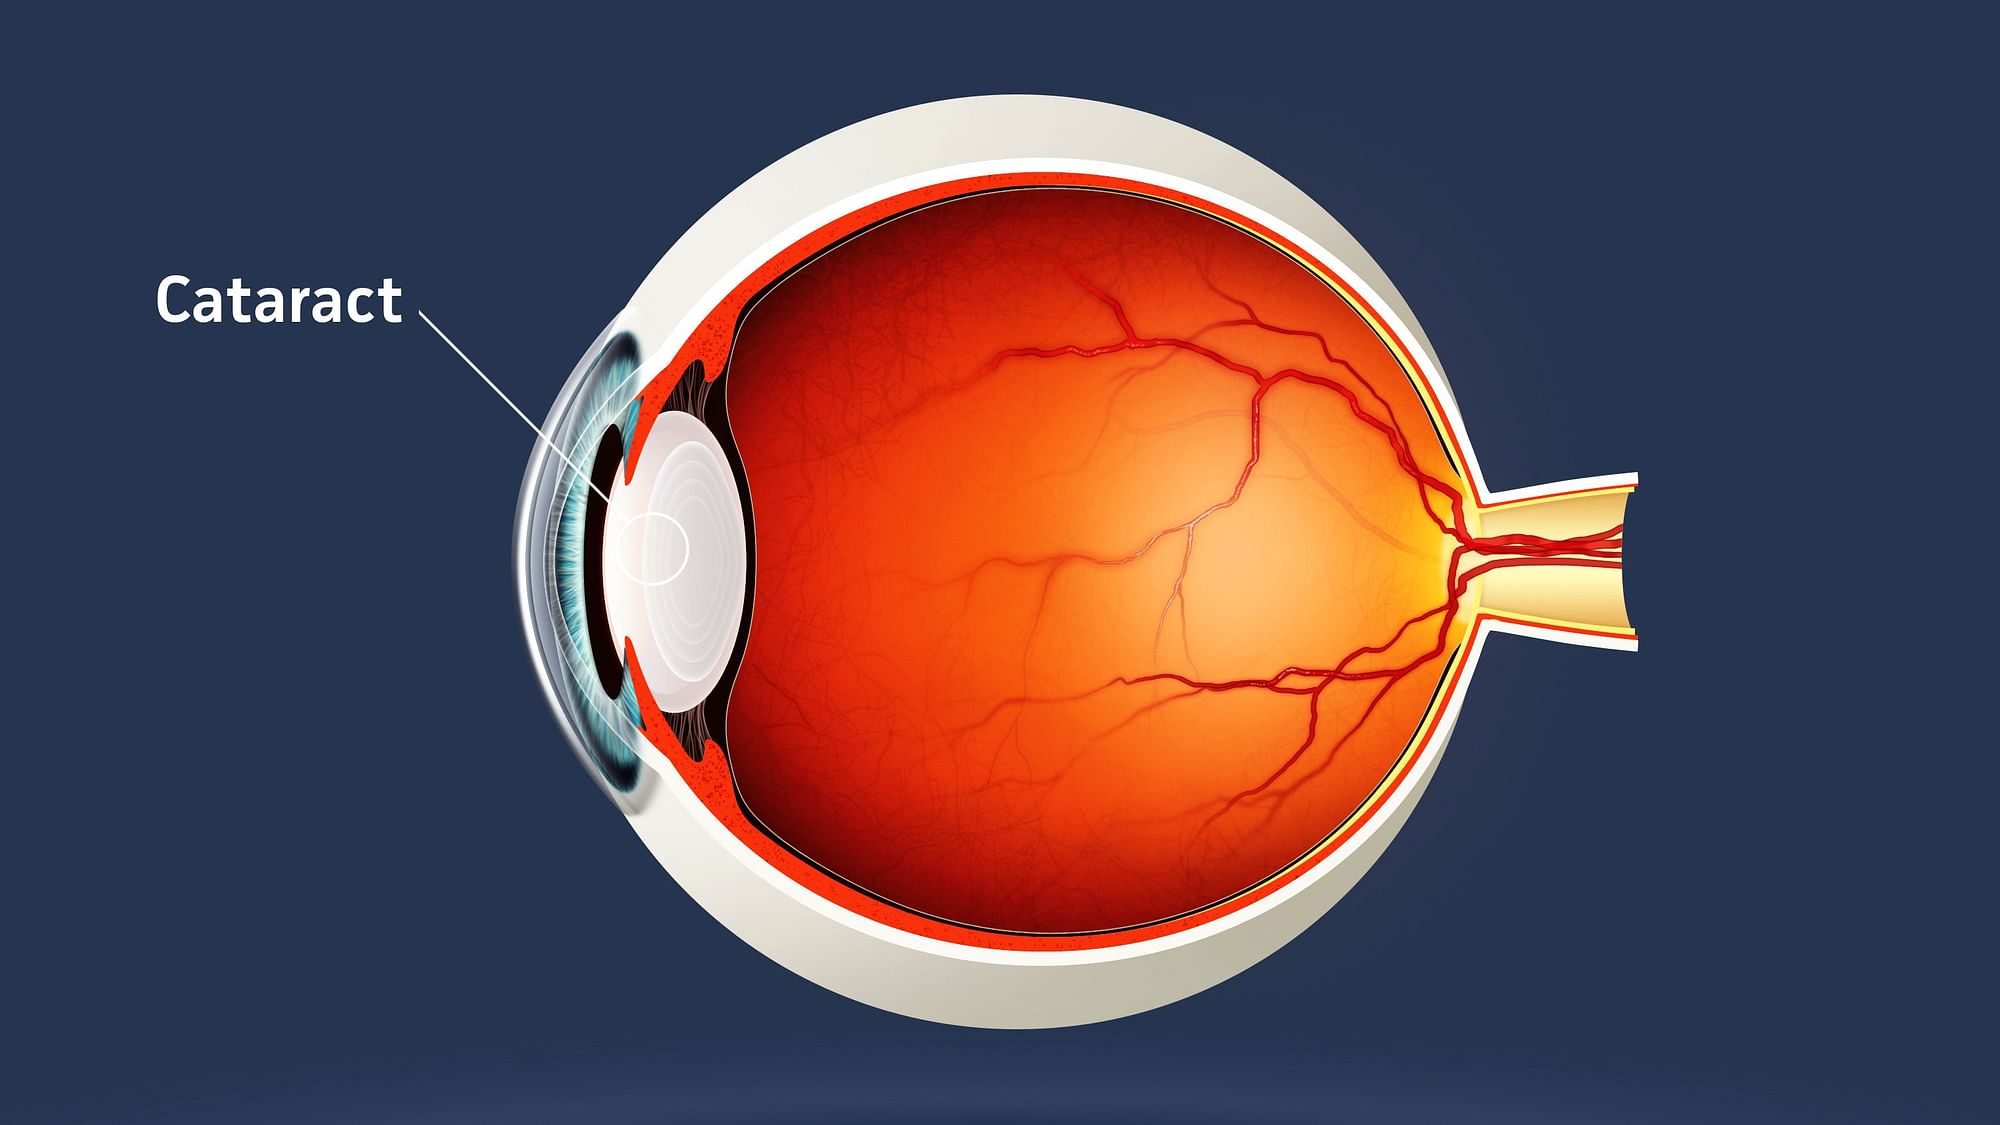 The Study Illustrates the Importance of Timely Cataract Surgery in Maintaining Safety and Continued Mobility and Independence in Older Adult Drivers